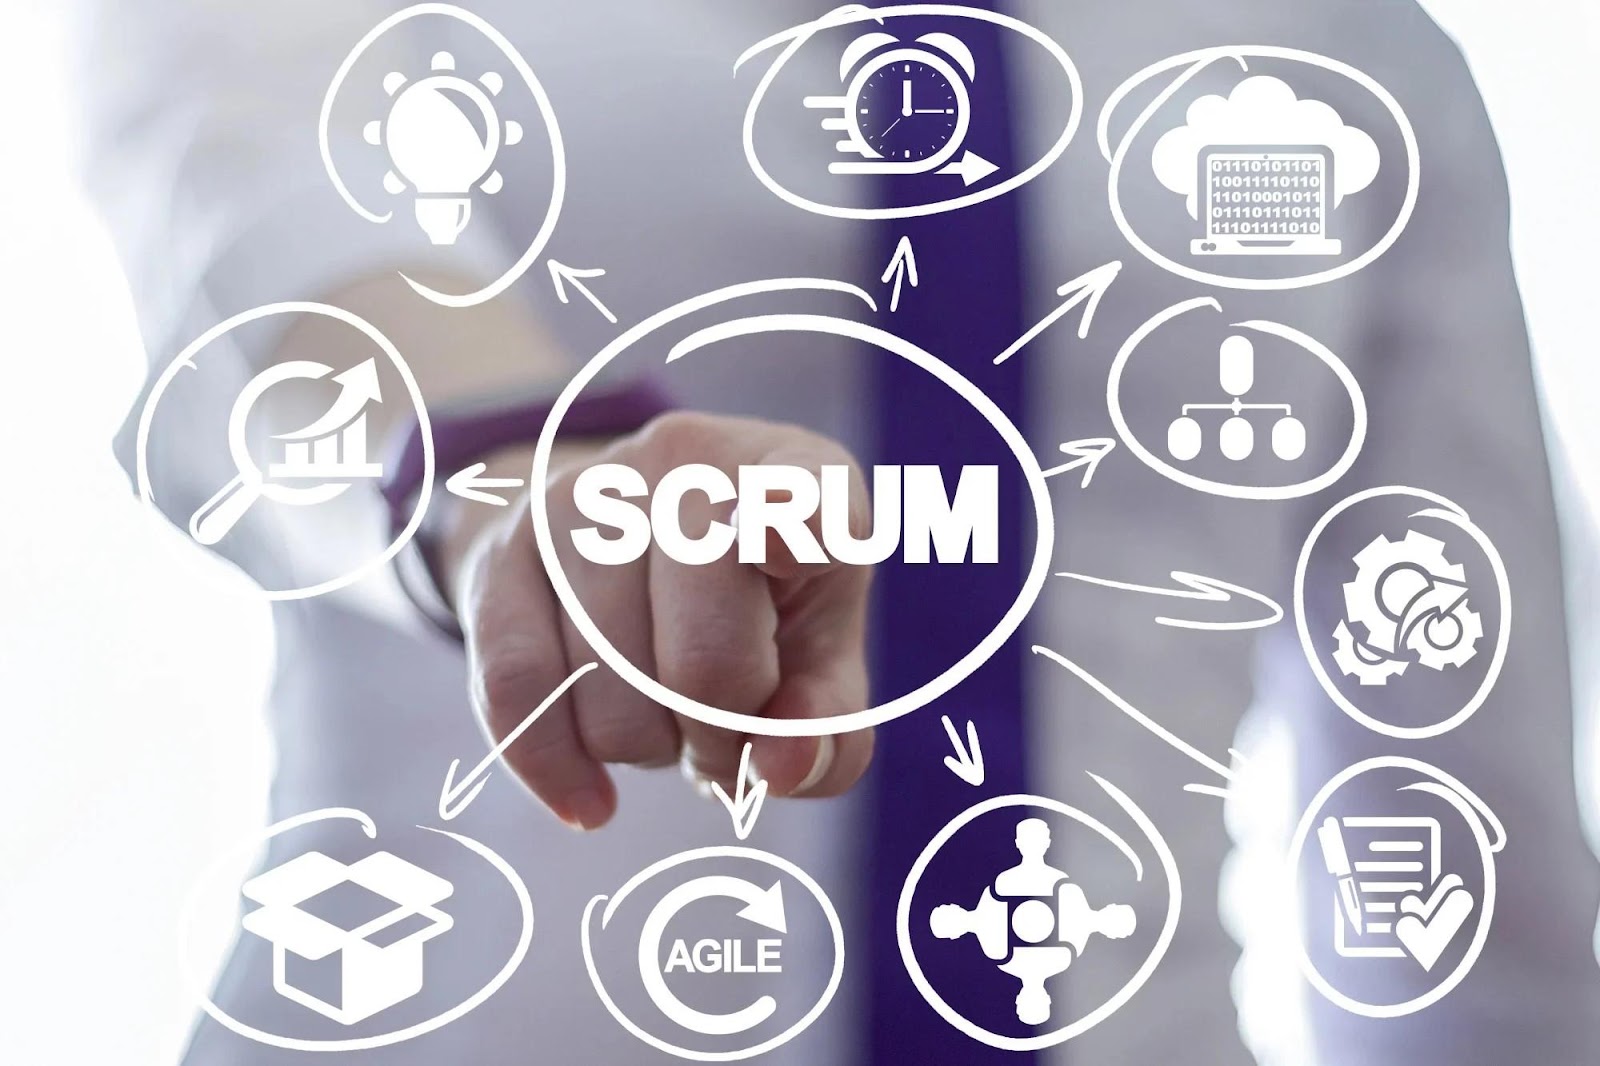 How Can You Land an Entry Level Scrum Master Job